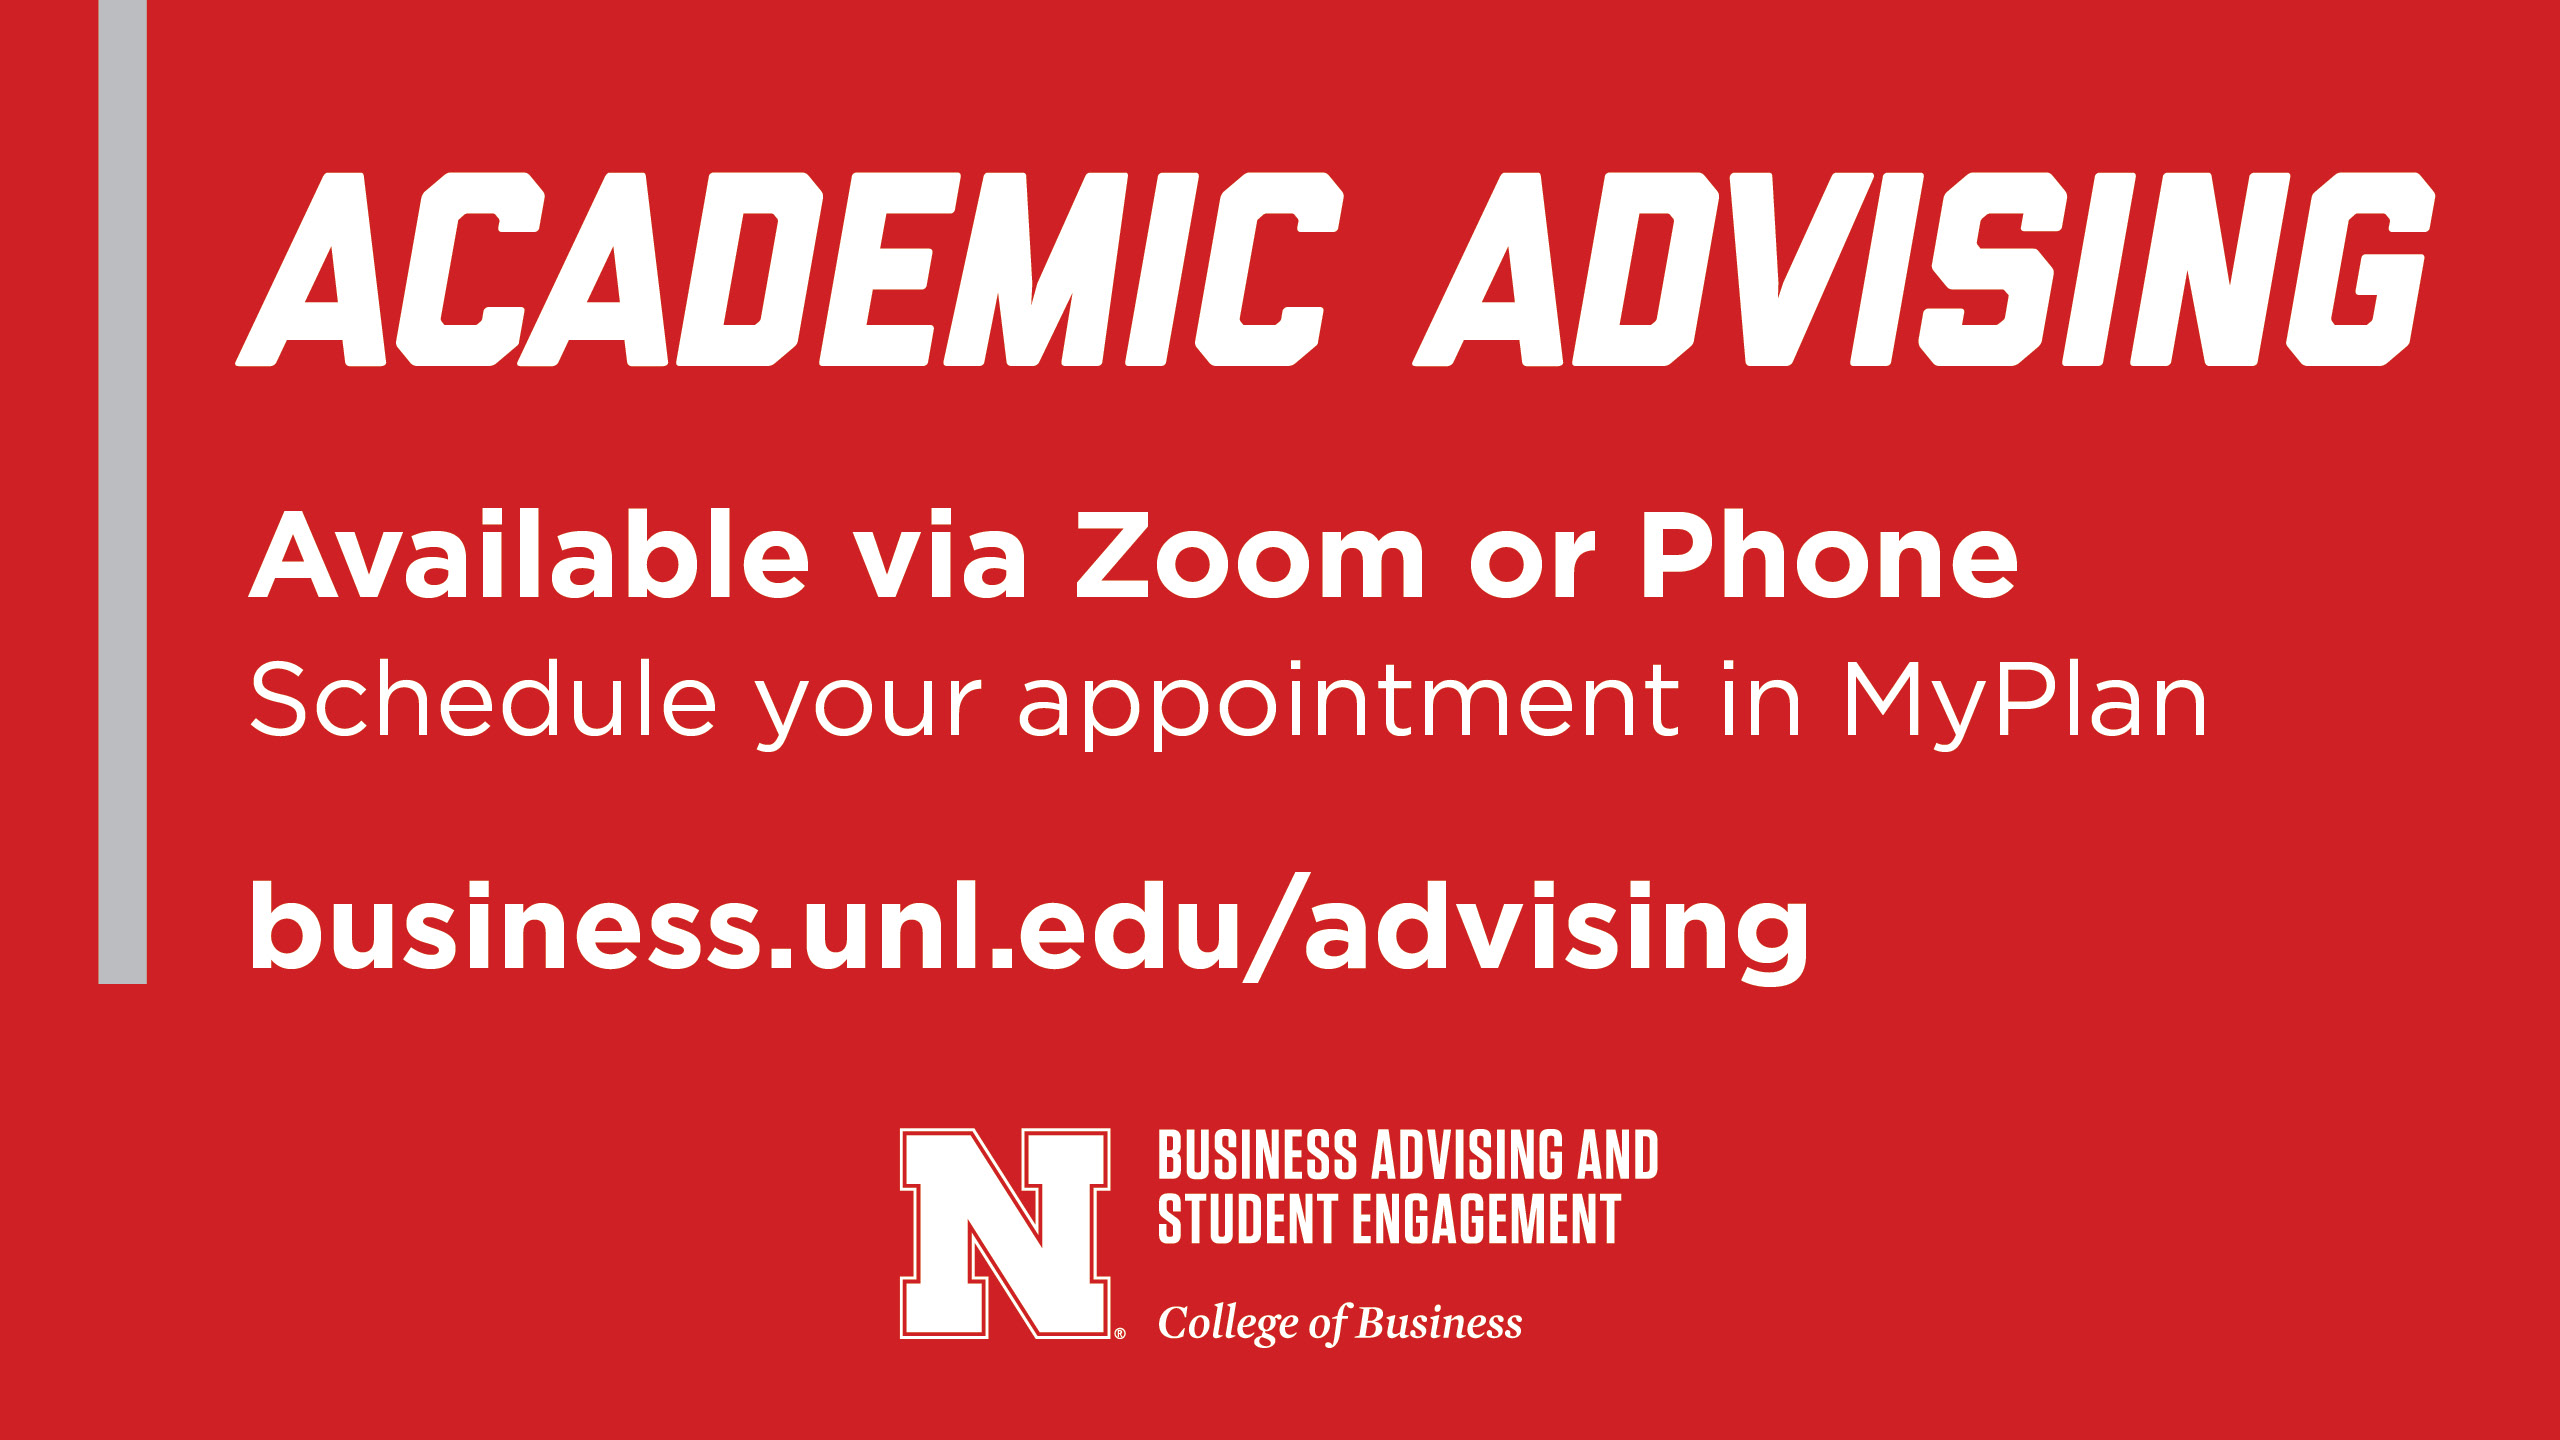 Academic advising is available via Zoom or Phone